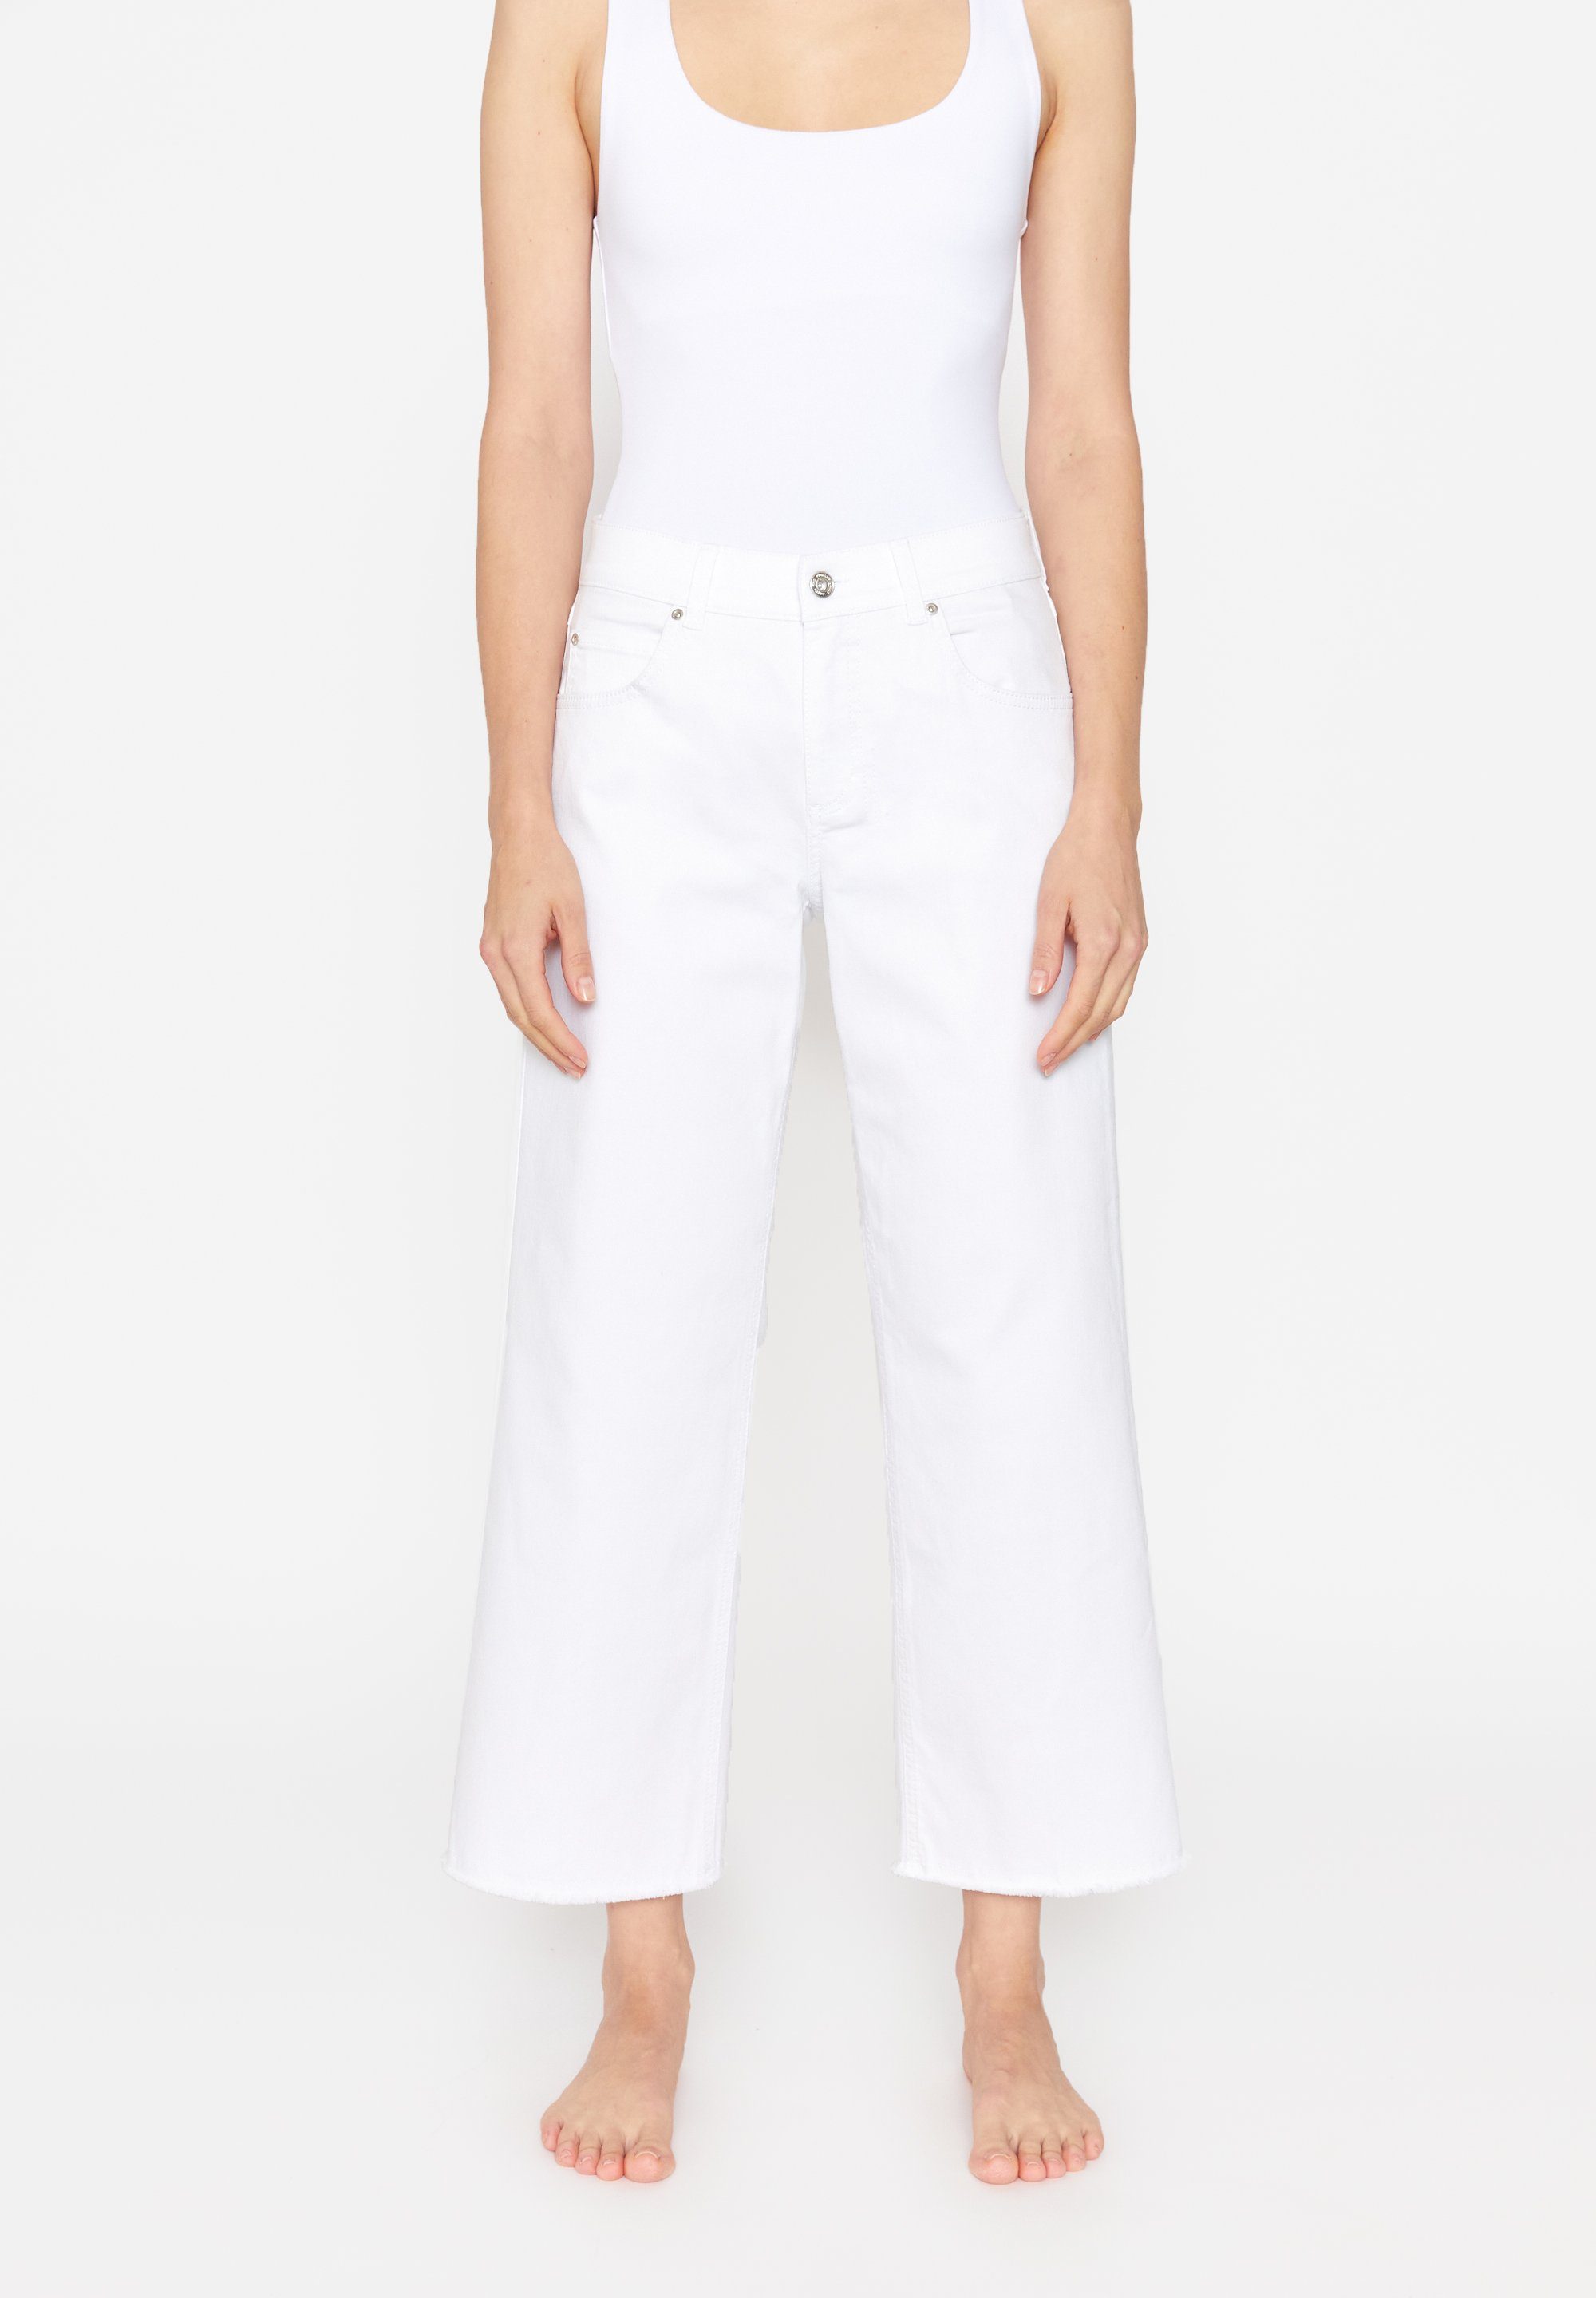 ANGELS Straight jeans Culotte